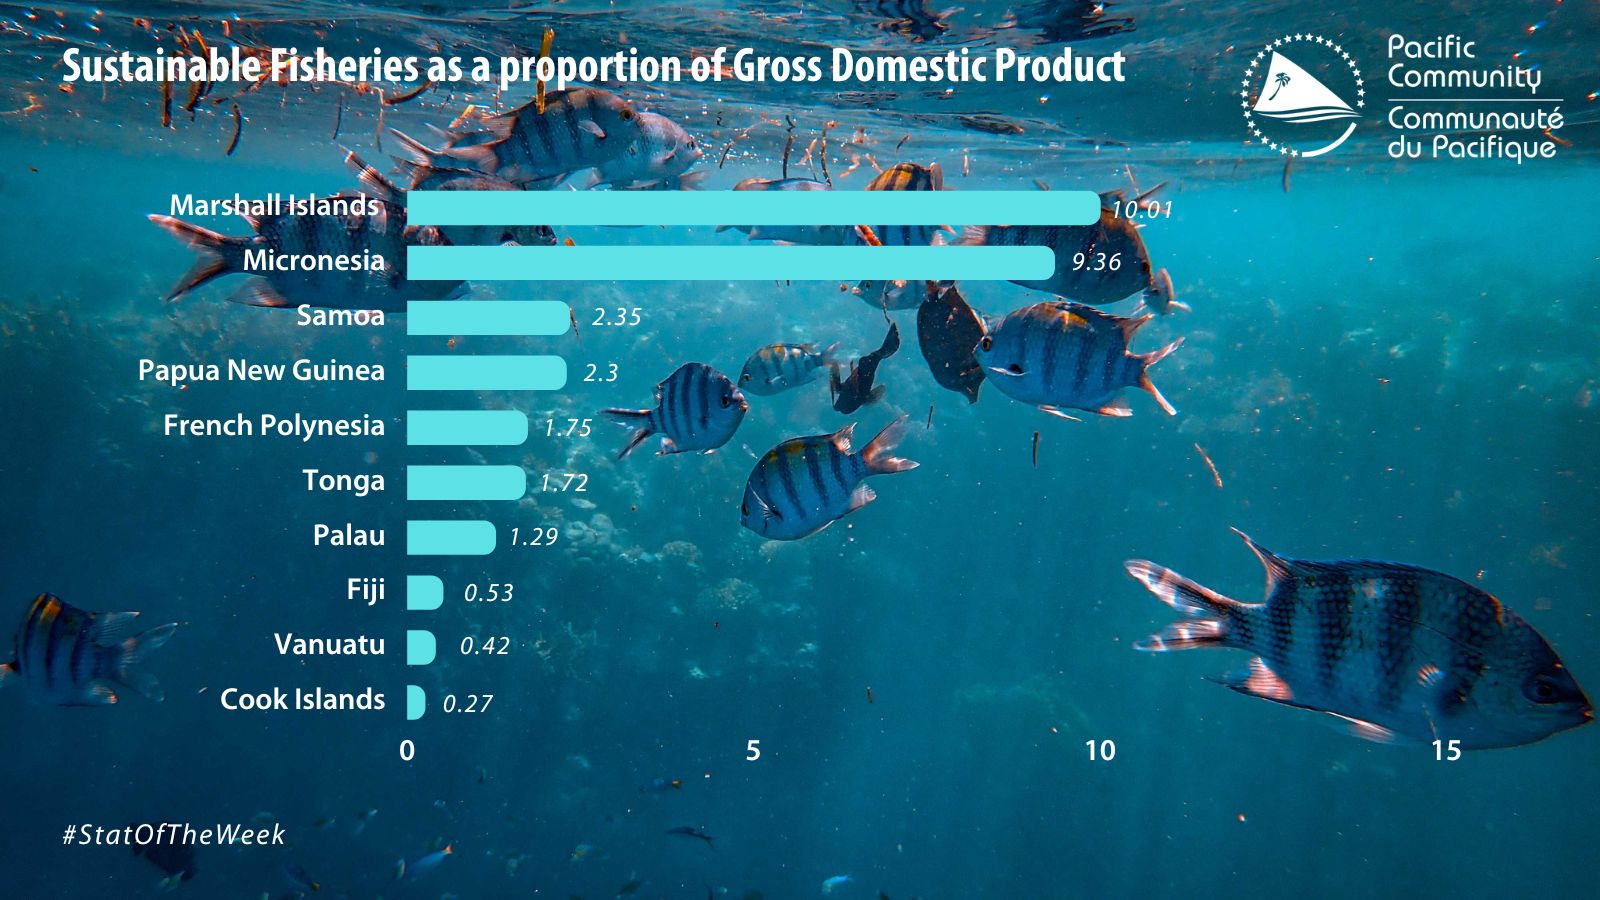  Sustainable Fisheries as a proportion of Gross Domestic Product 